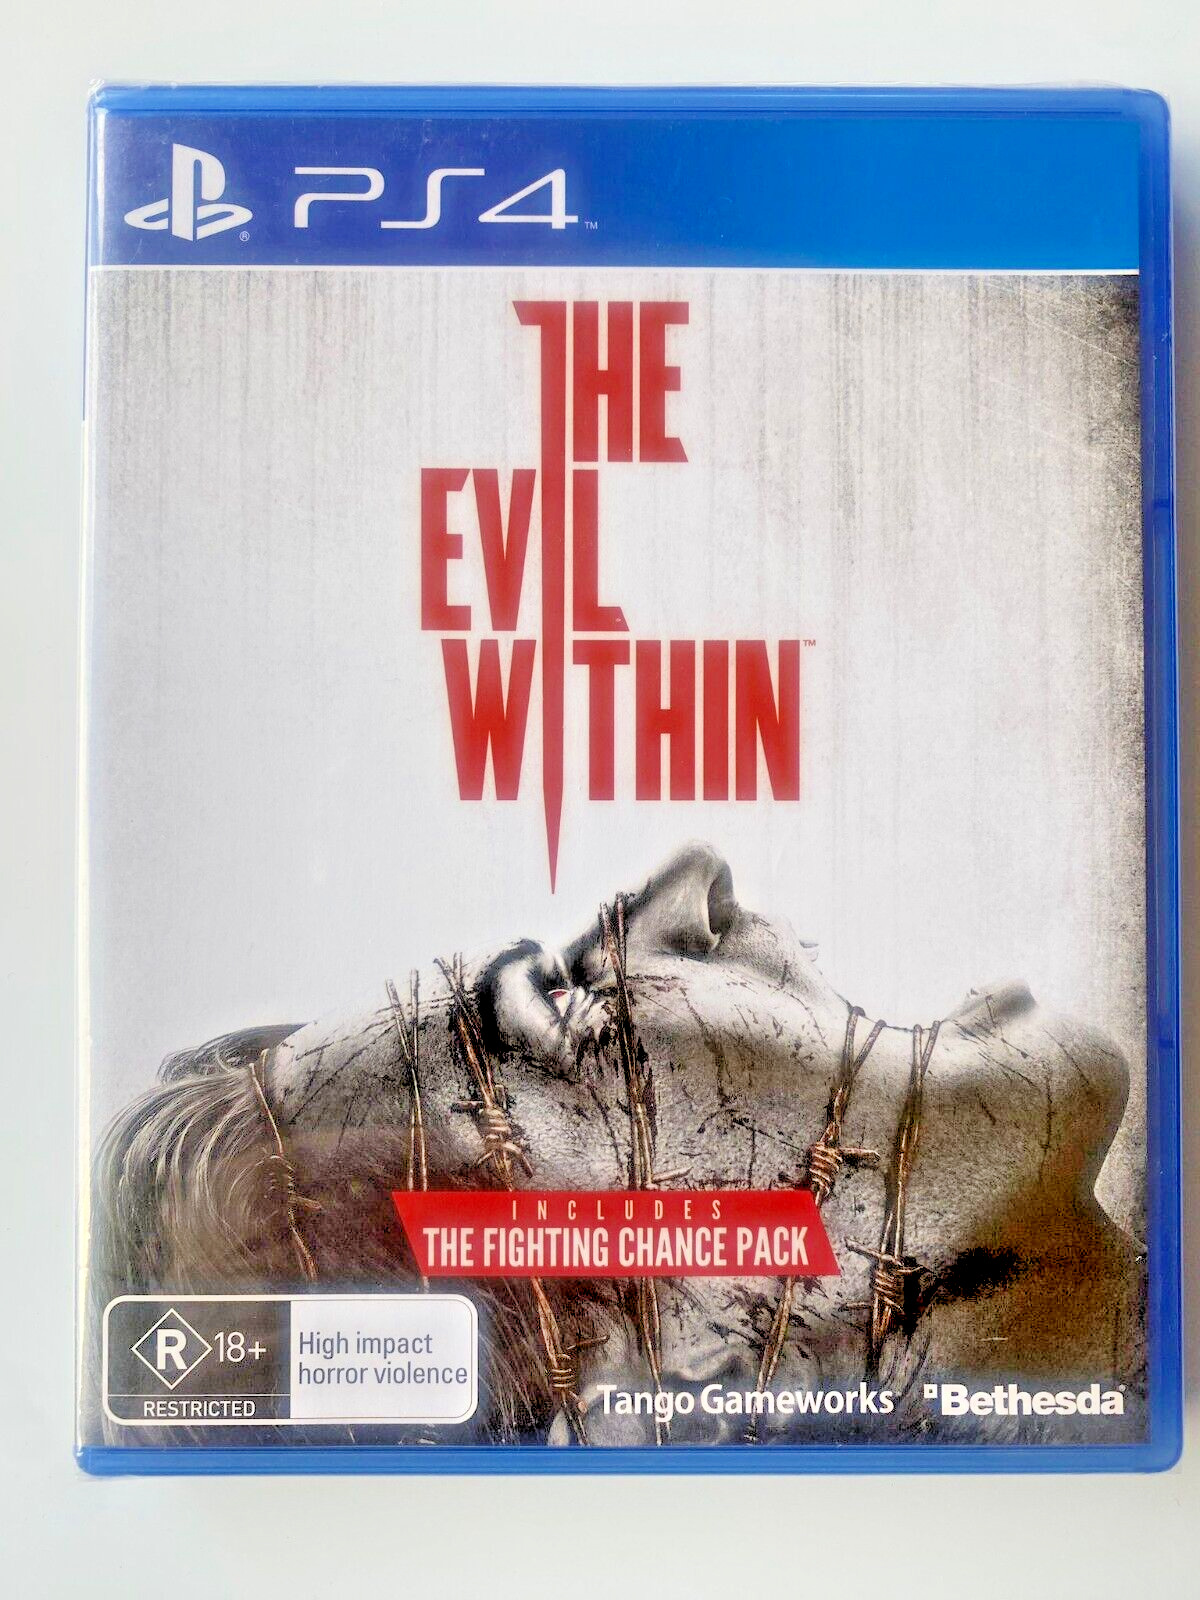 The Evil Within Sony PlayStation 4 PS4 Videogame Hits Brand New Sealed Region 4